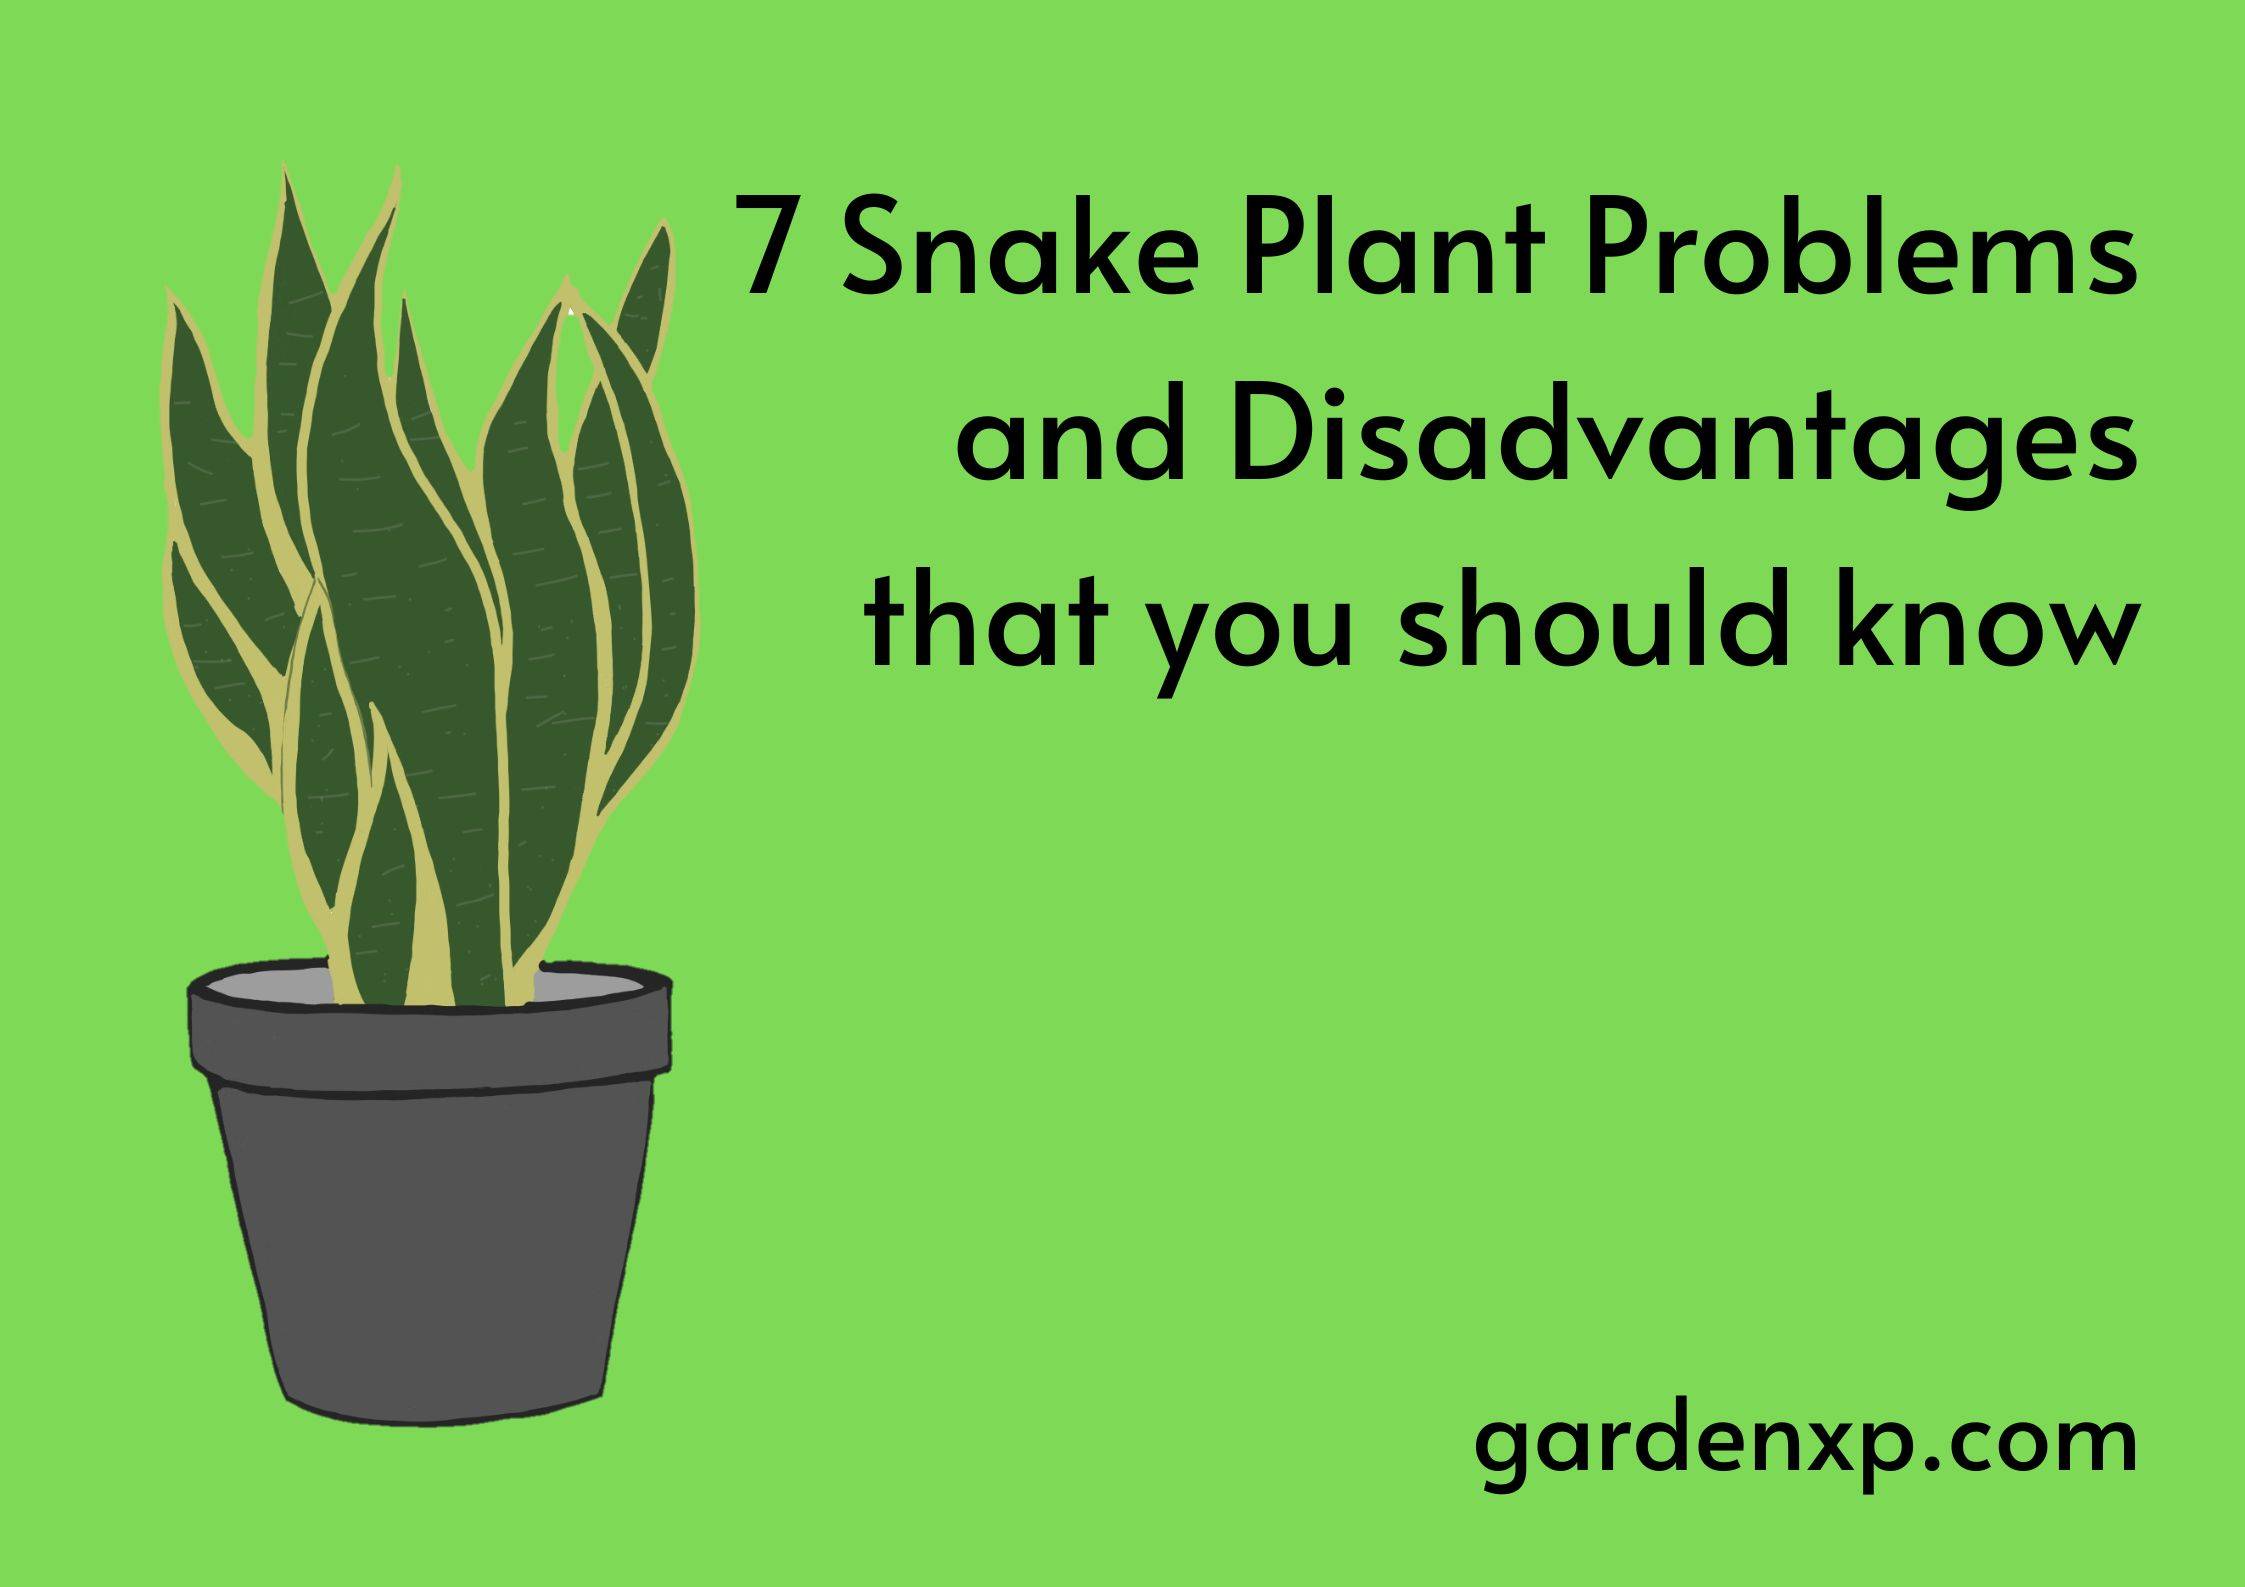 7 Snake Plant Problems and Disadvantages that you should know